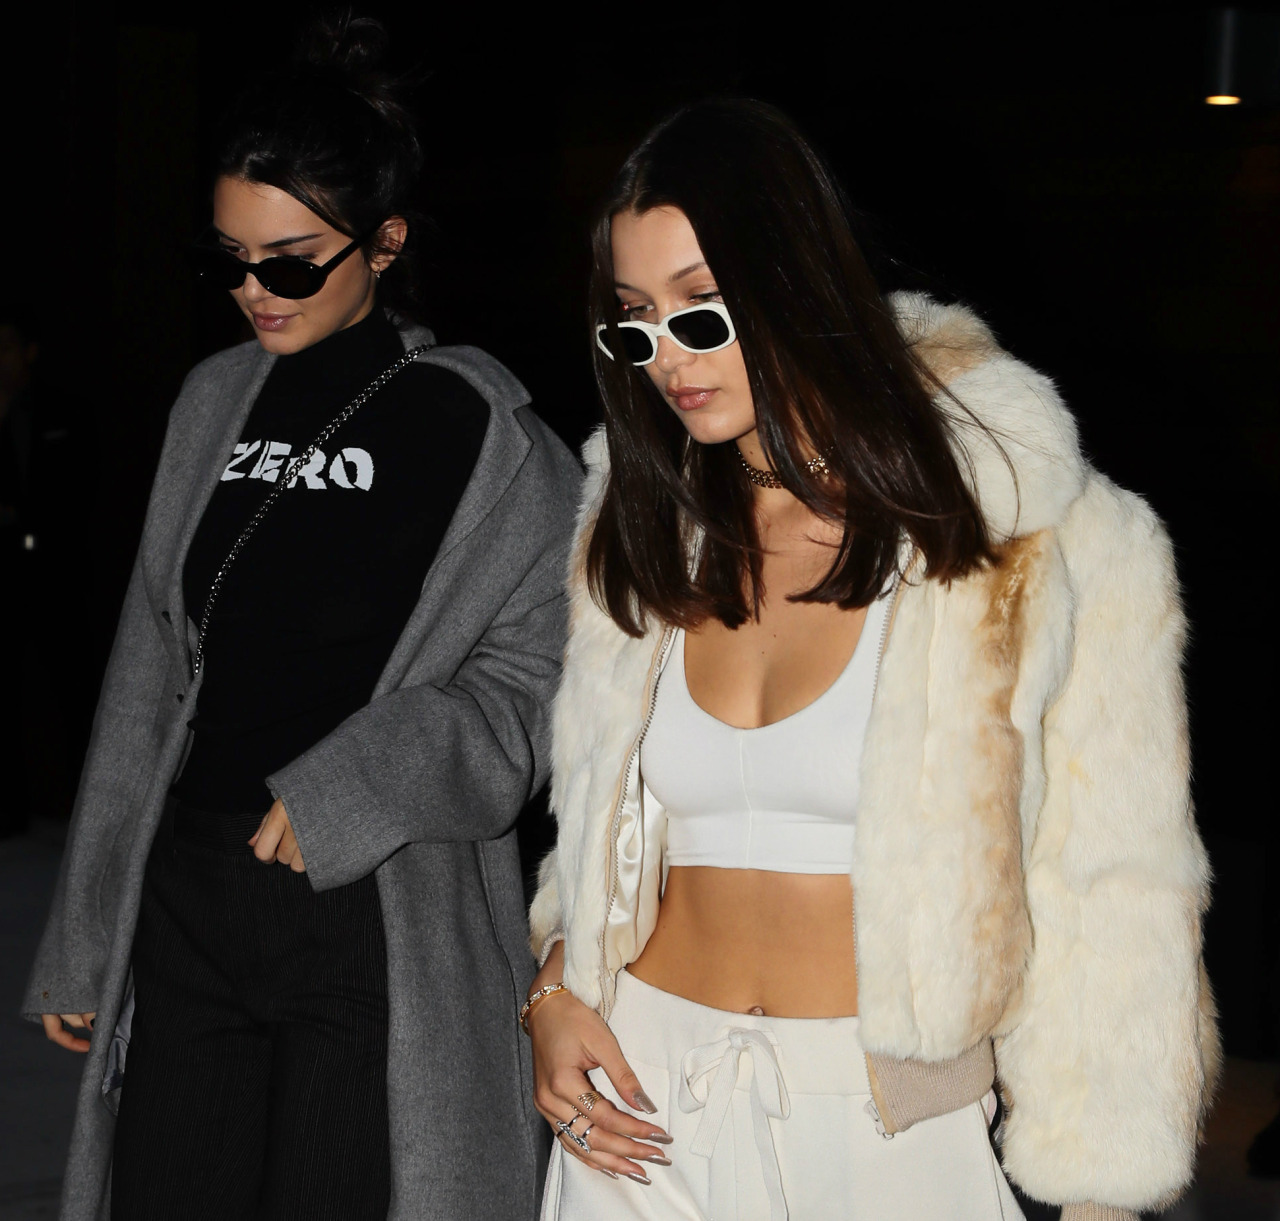 Verge Girl — bel-hadid: Kendall Jenner and Bella Hadid out in...